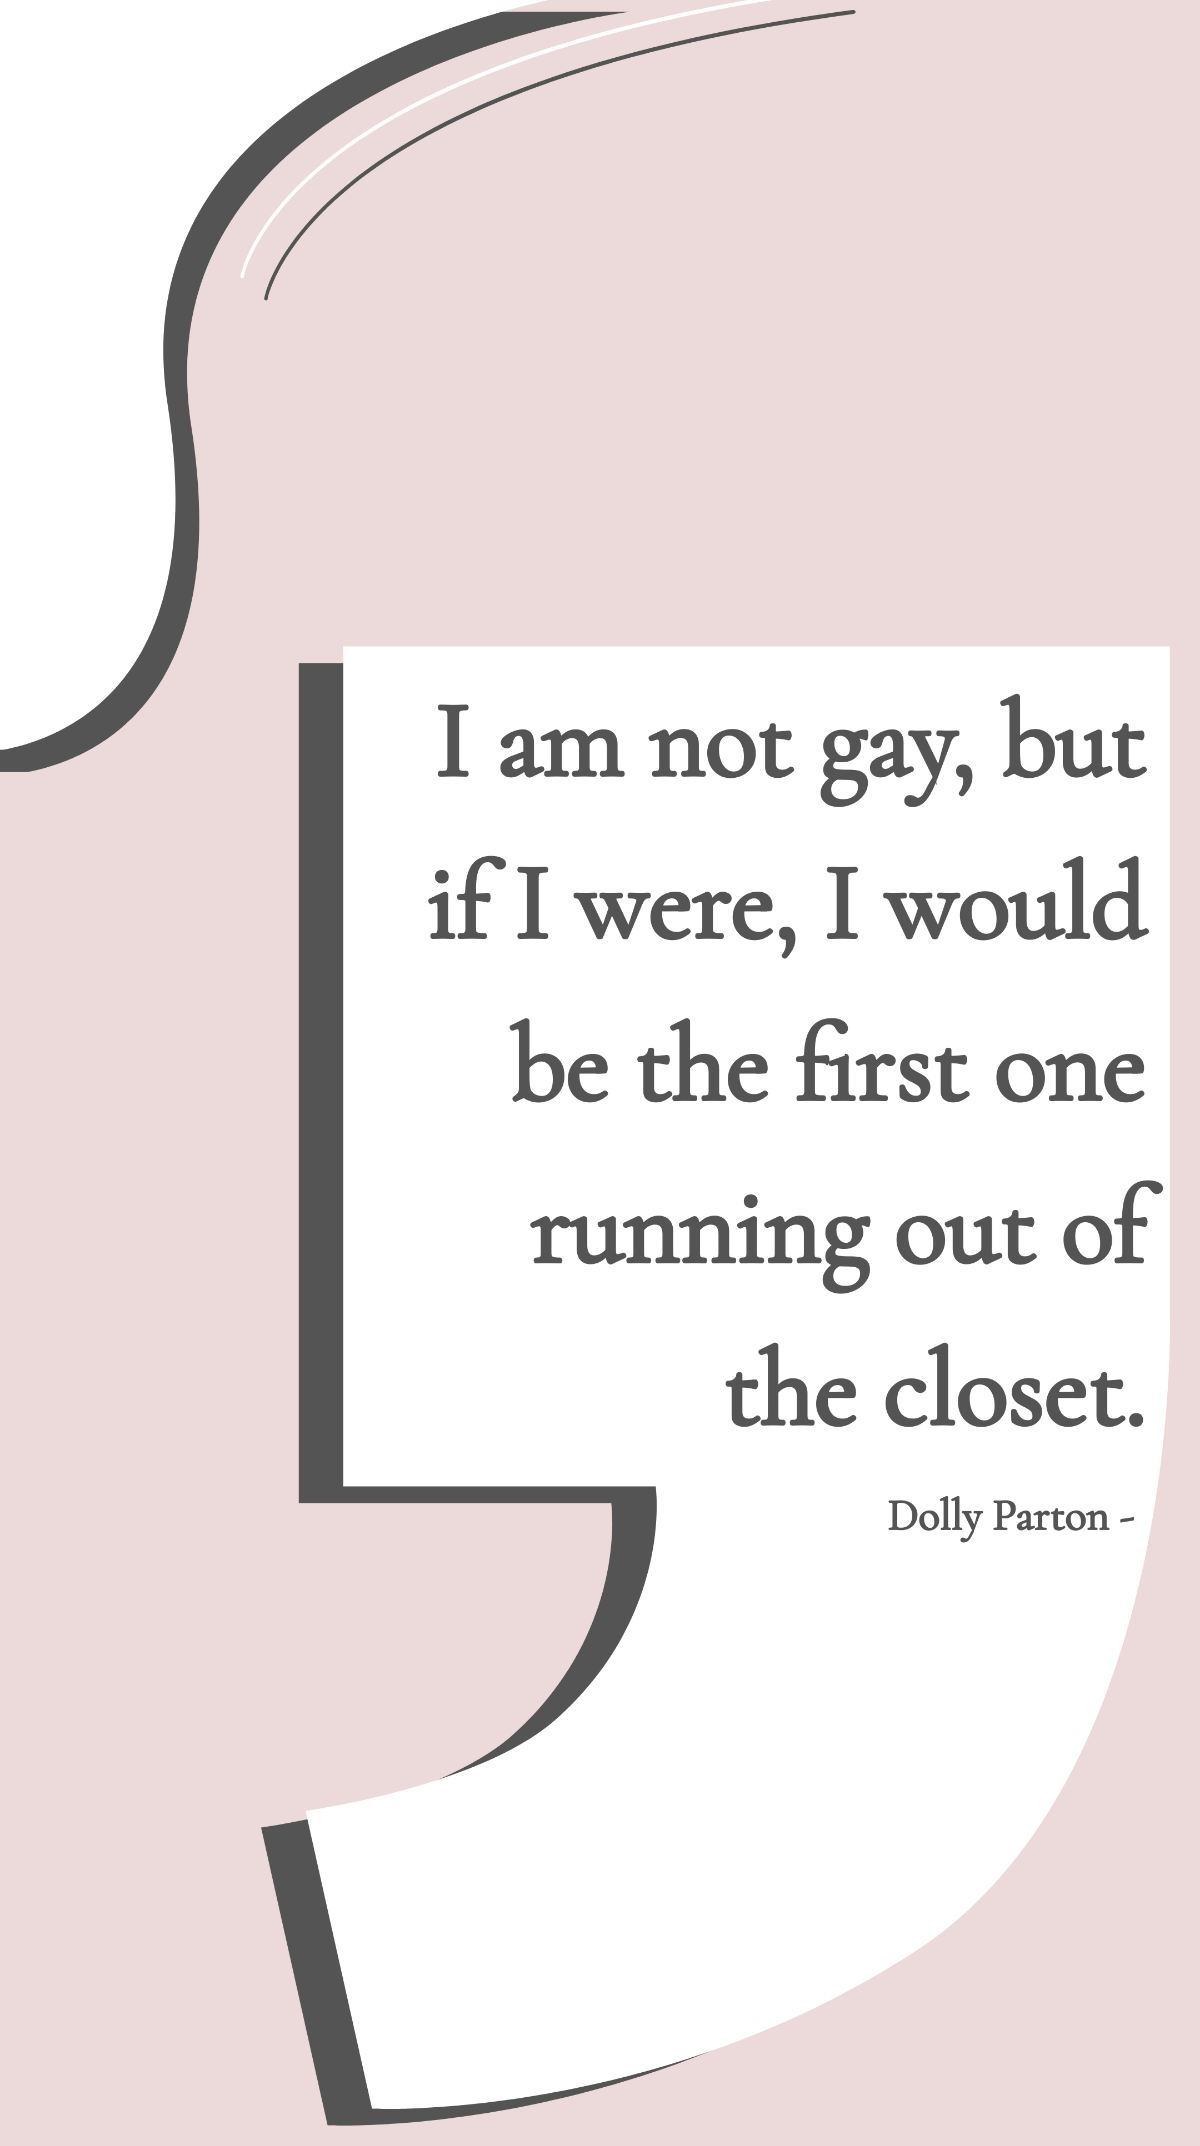 Dolly Parton - I am not gay, but if I were, I would be the first one running out of the closet. Template